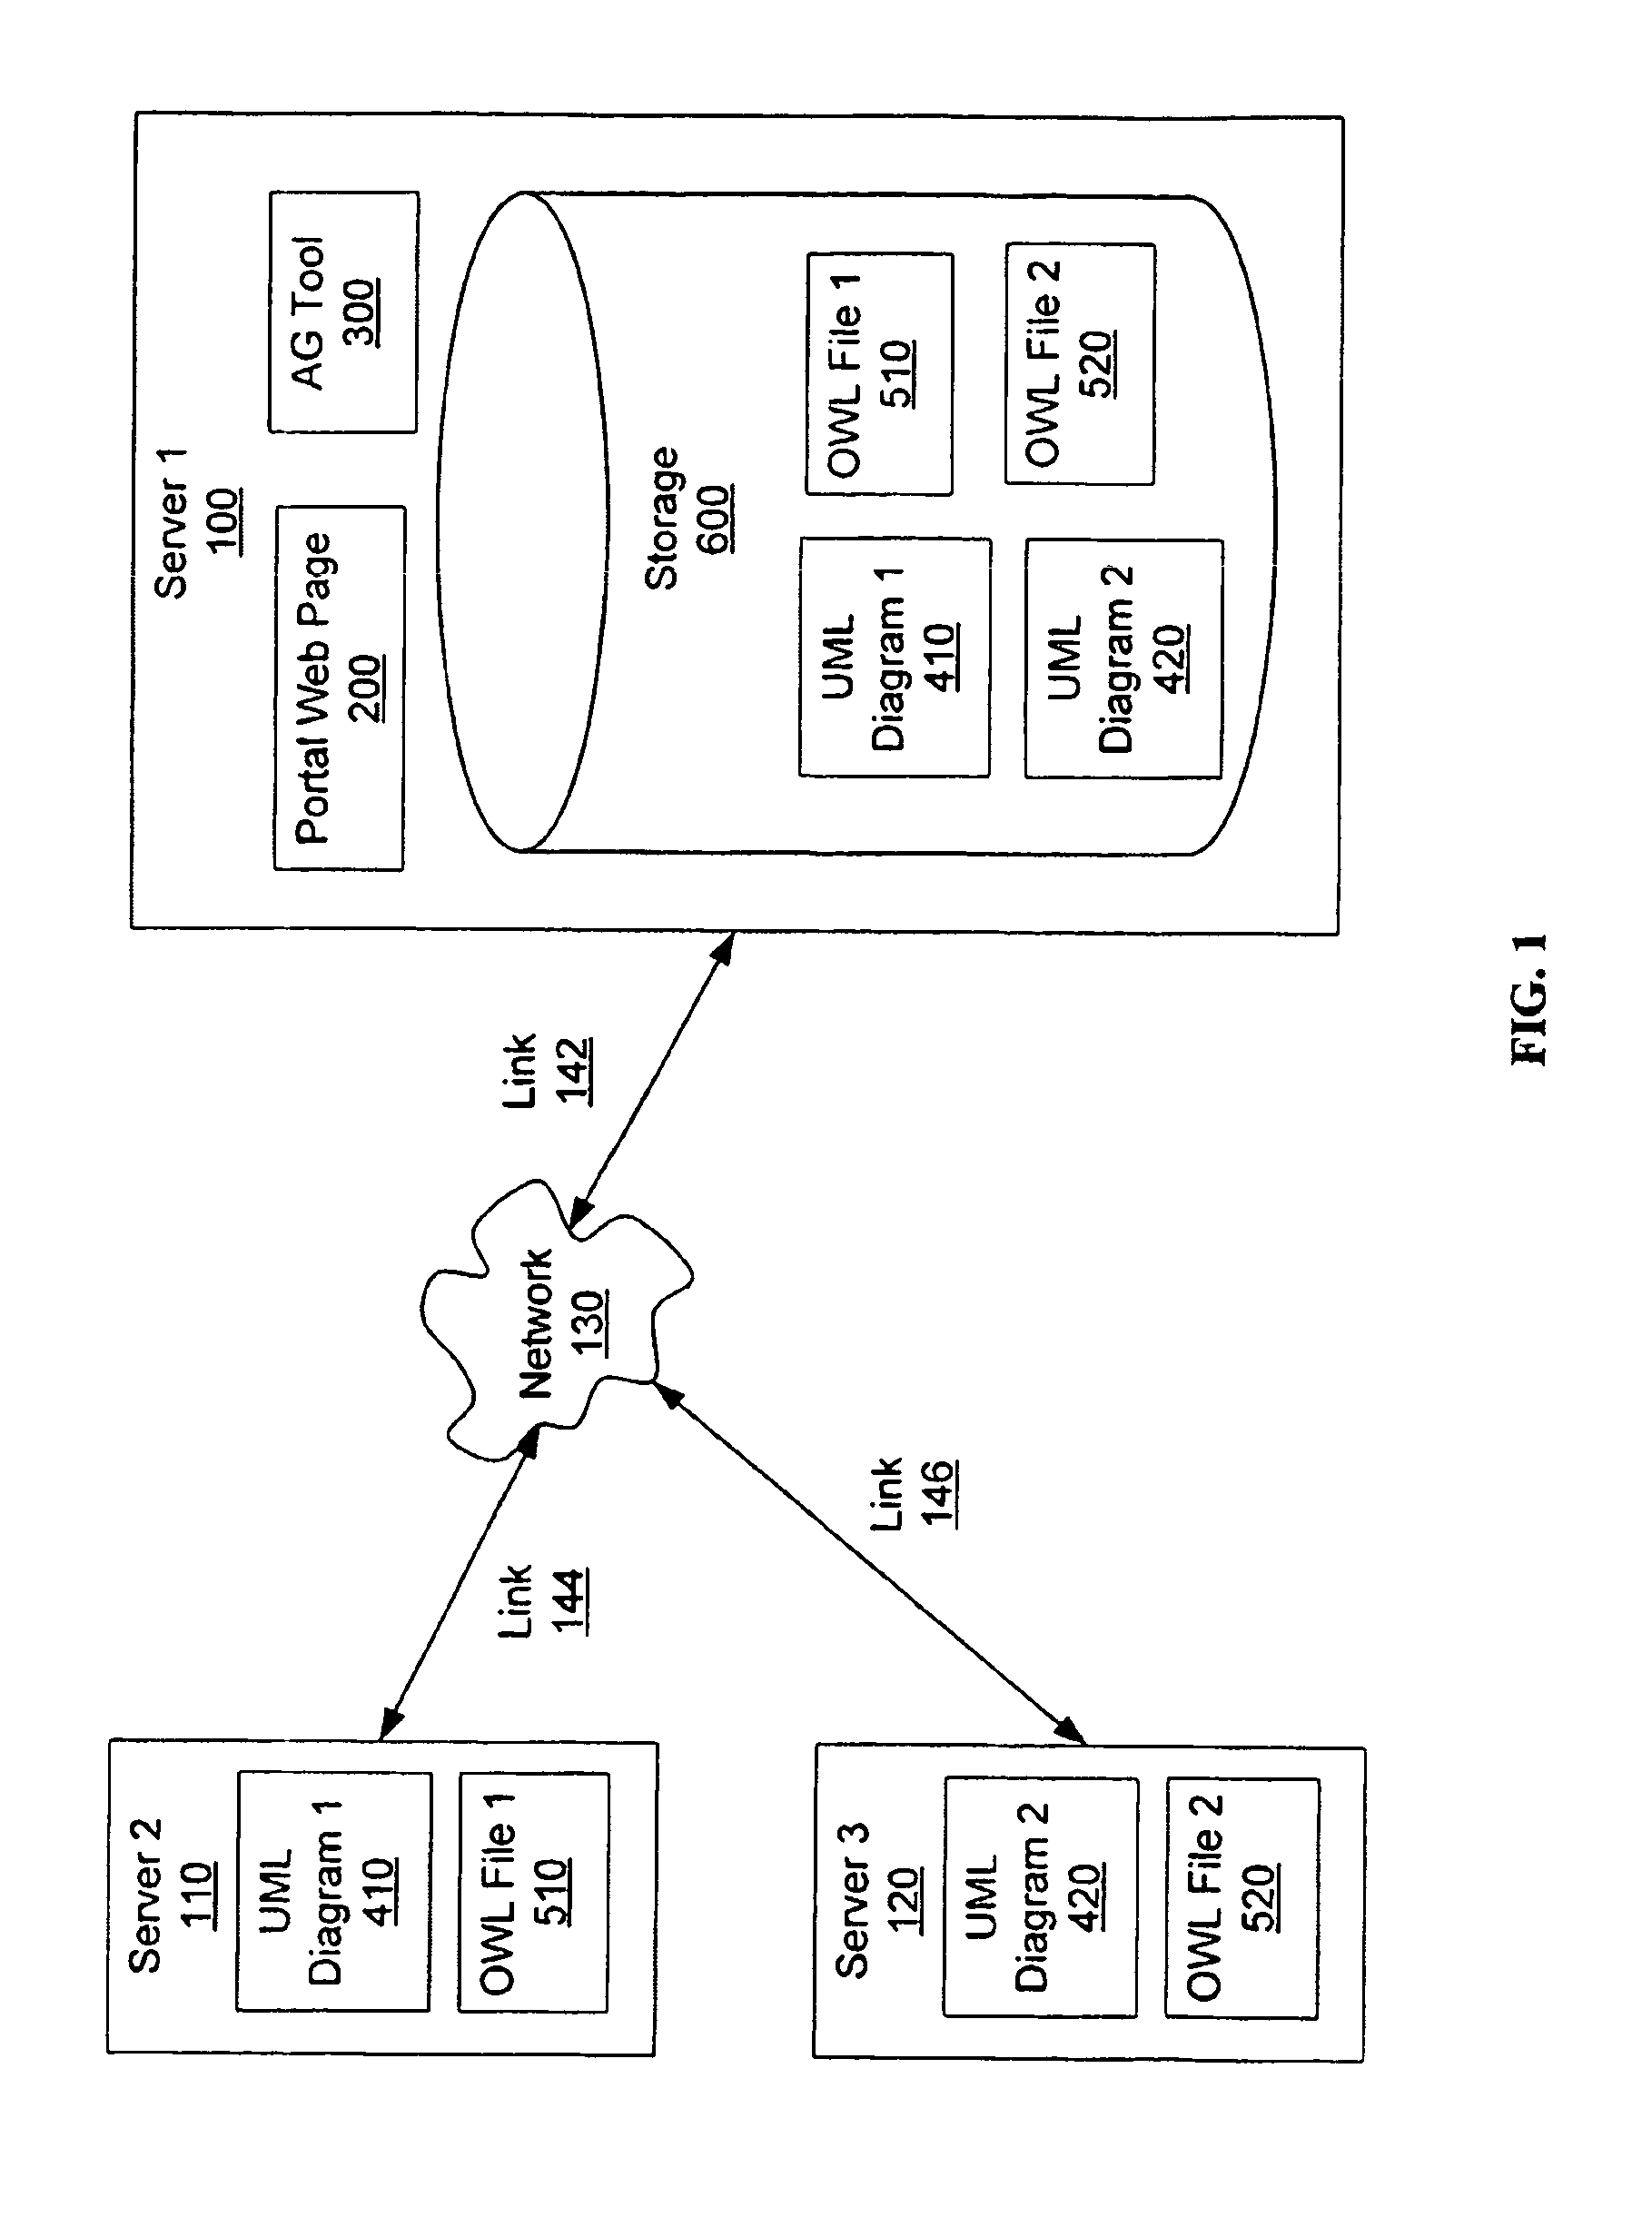 System and method for the autogeneration of ontologies